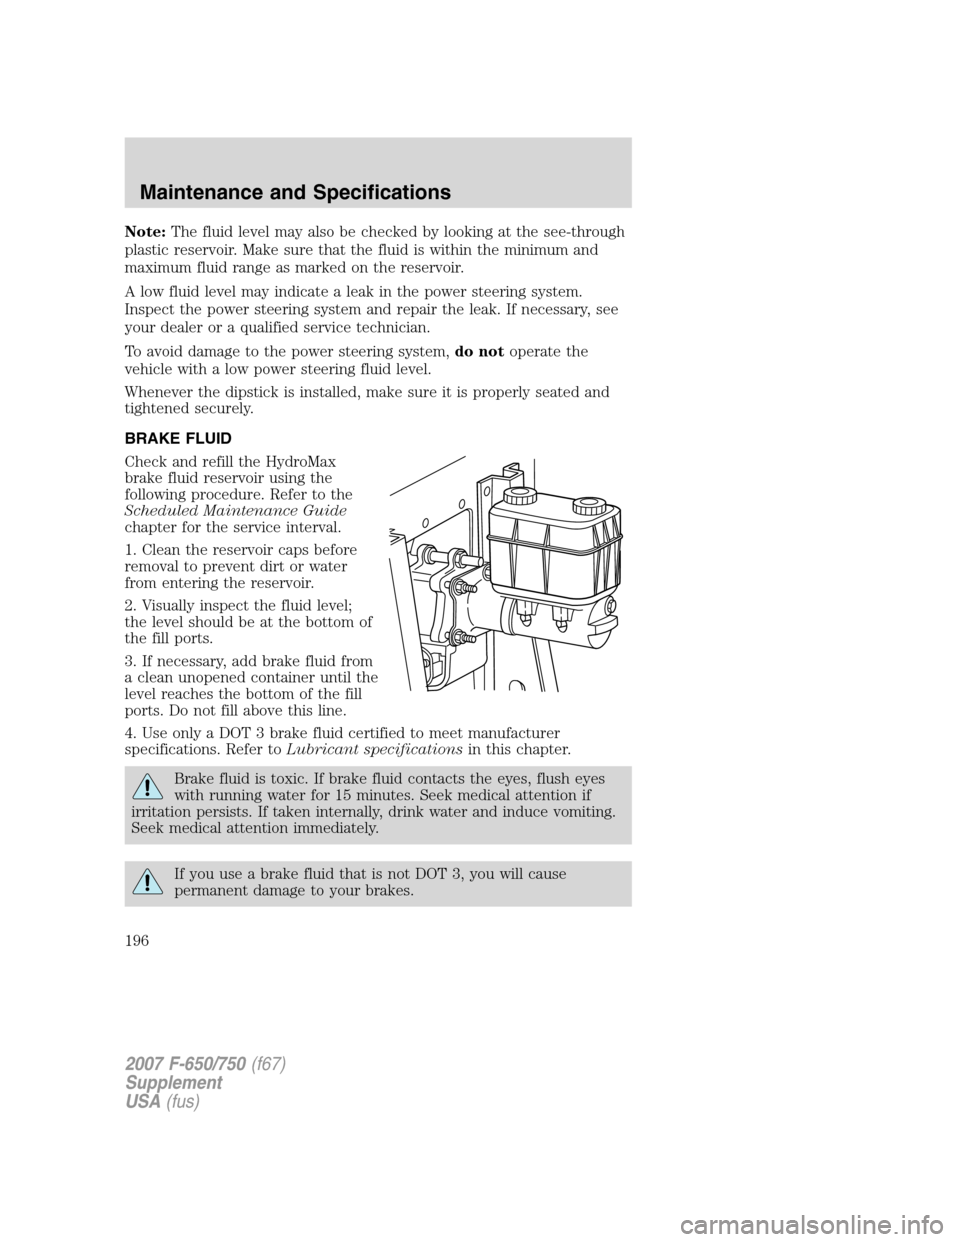 FORD F650 2007 11.G Service Manual Note:The fluid level may also be checked by looking at the see-through
plastic reservoir. Make sure that the fluid is within the minimum and
maximum fluid range as marked on the reservoir.
A low fluid